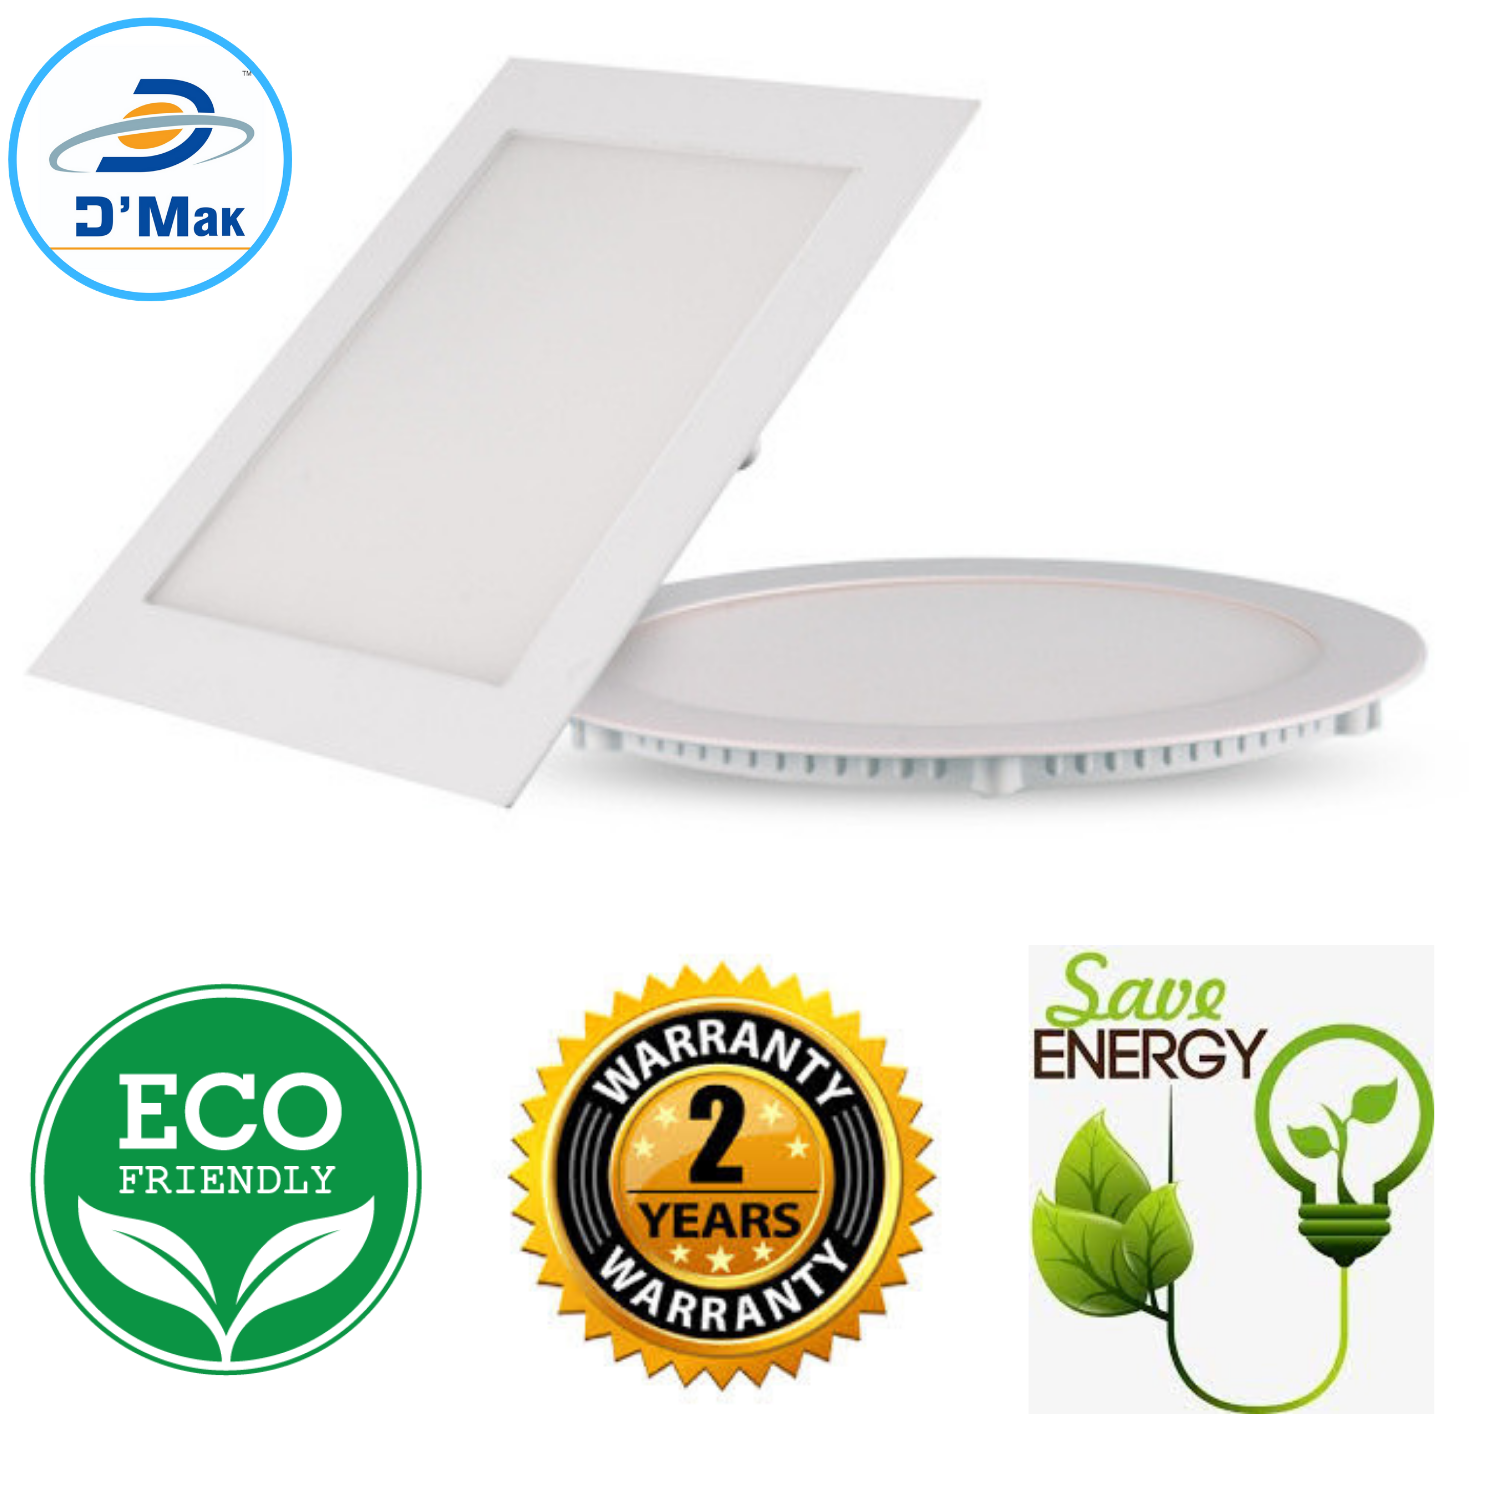 22 Watt LED Round Conceal Panel Light Color-3 IN 1